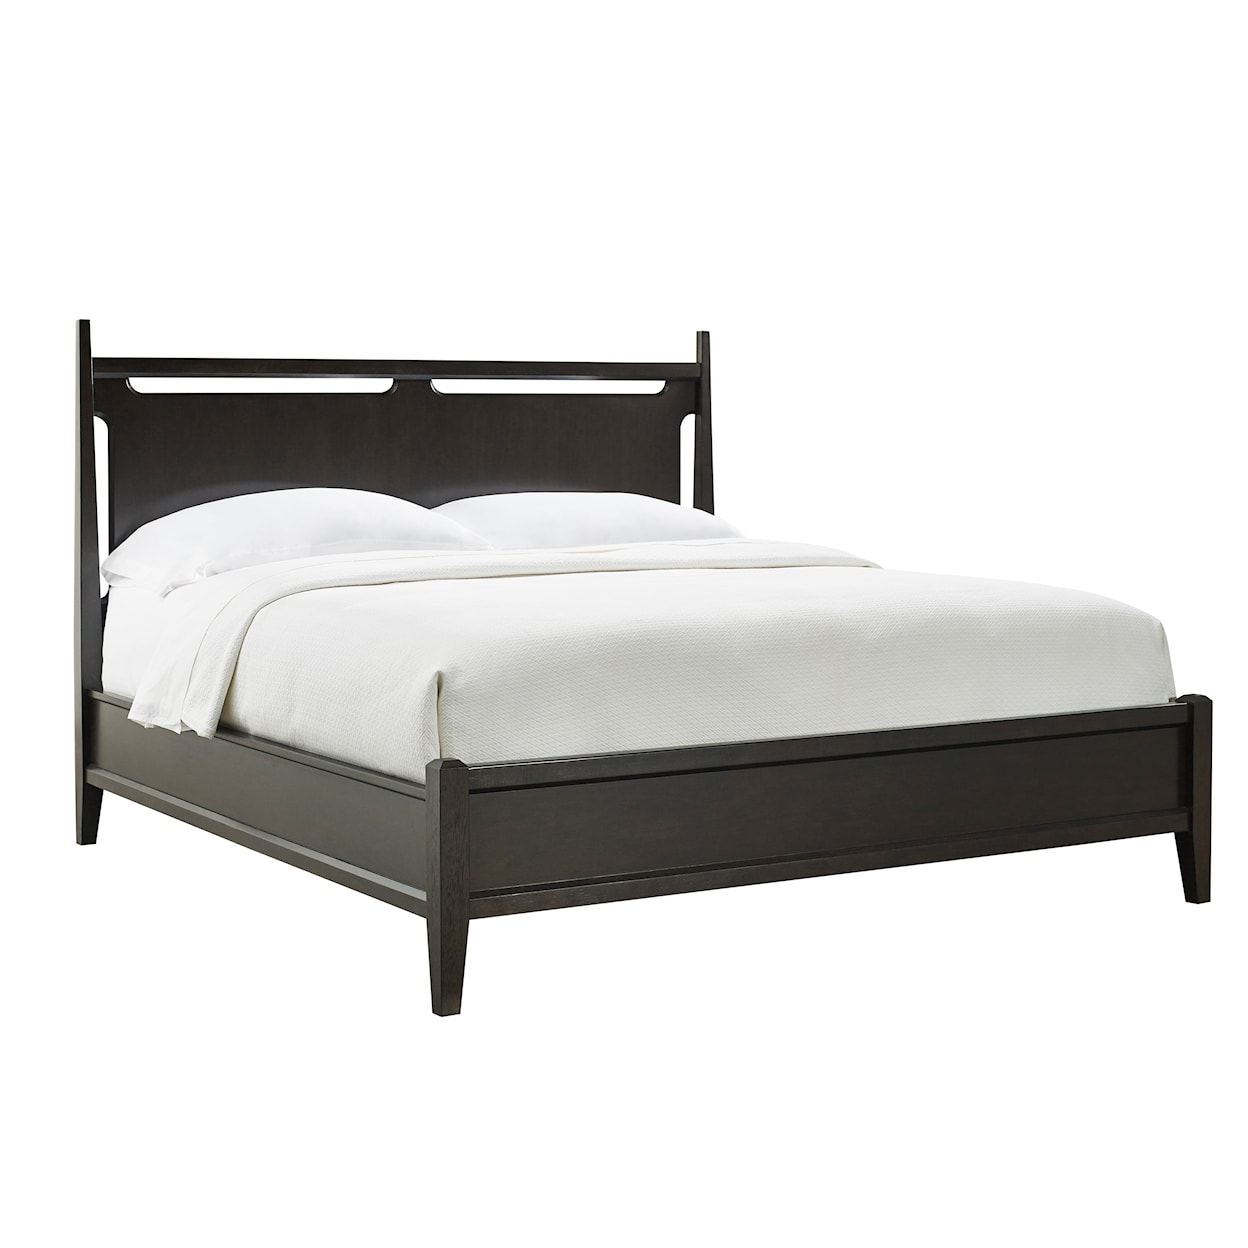 Aspenhome Sutton King Panel Bed